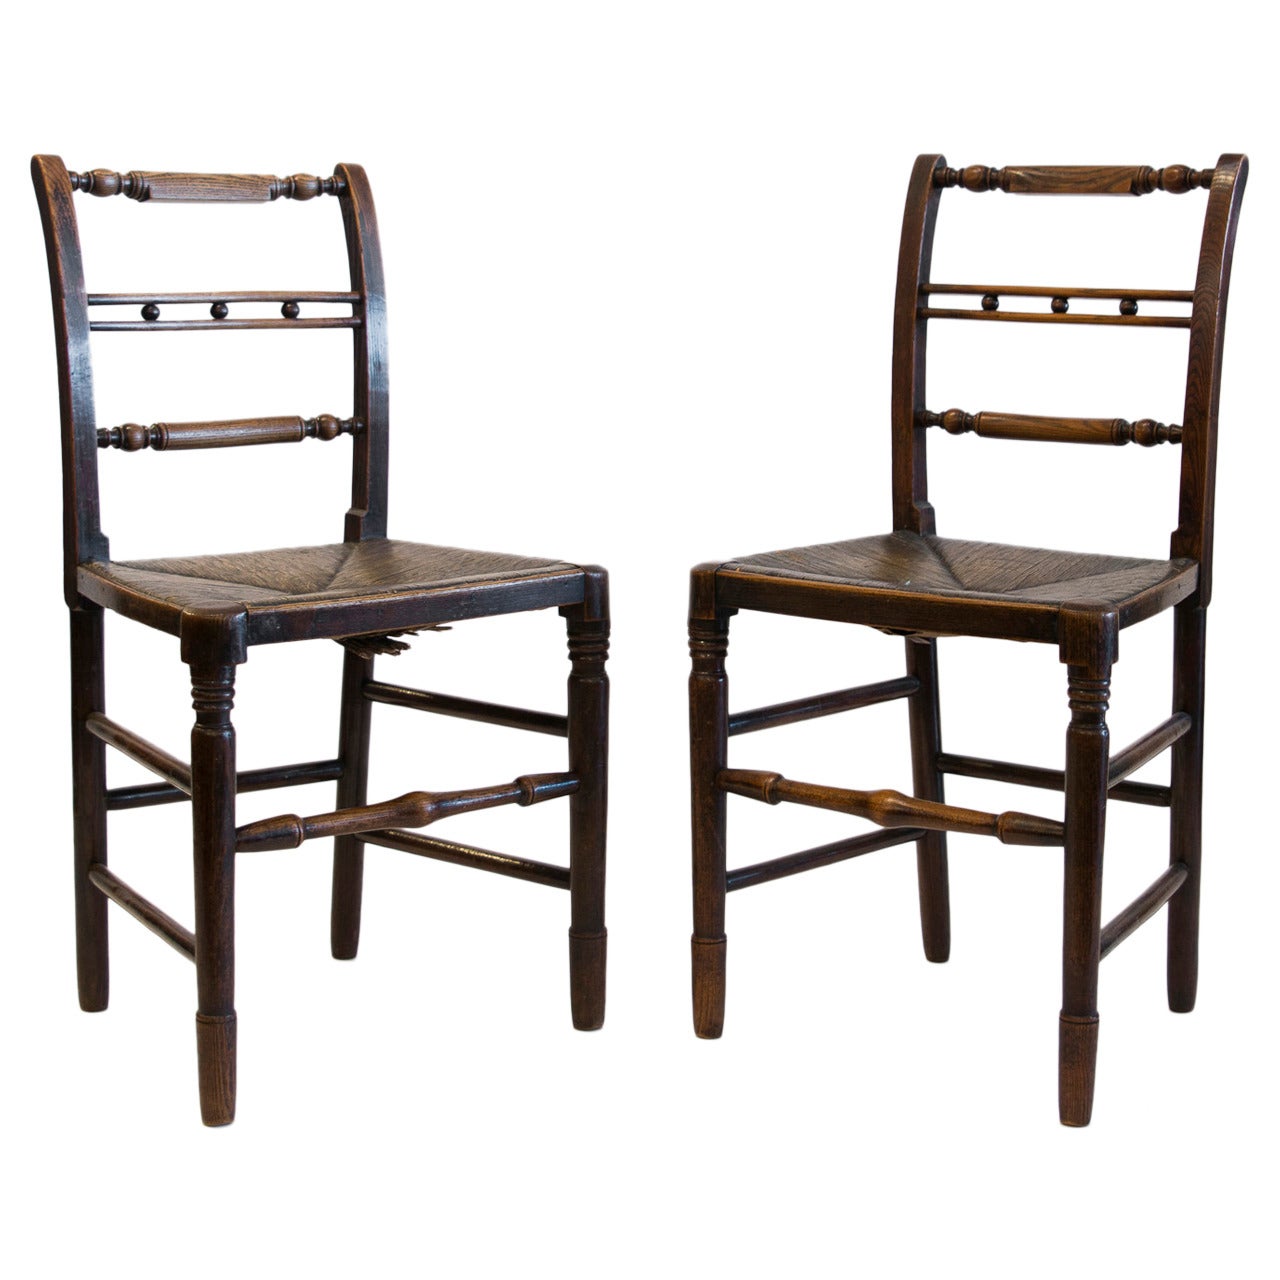 Pair of English Provincial Side Chairs